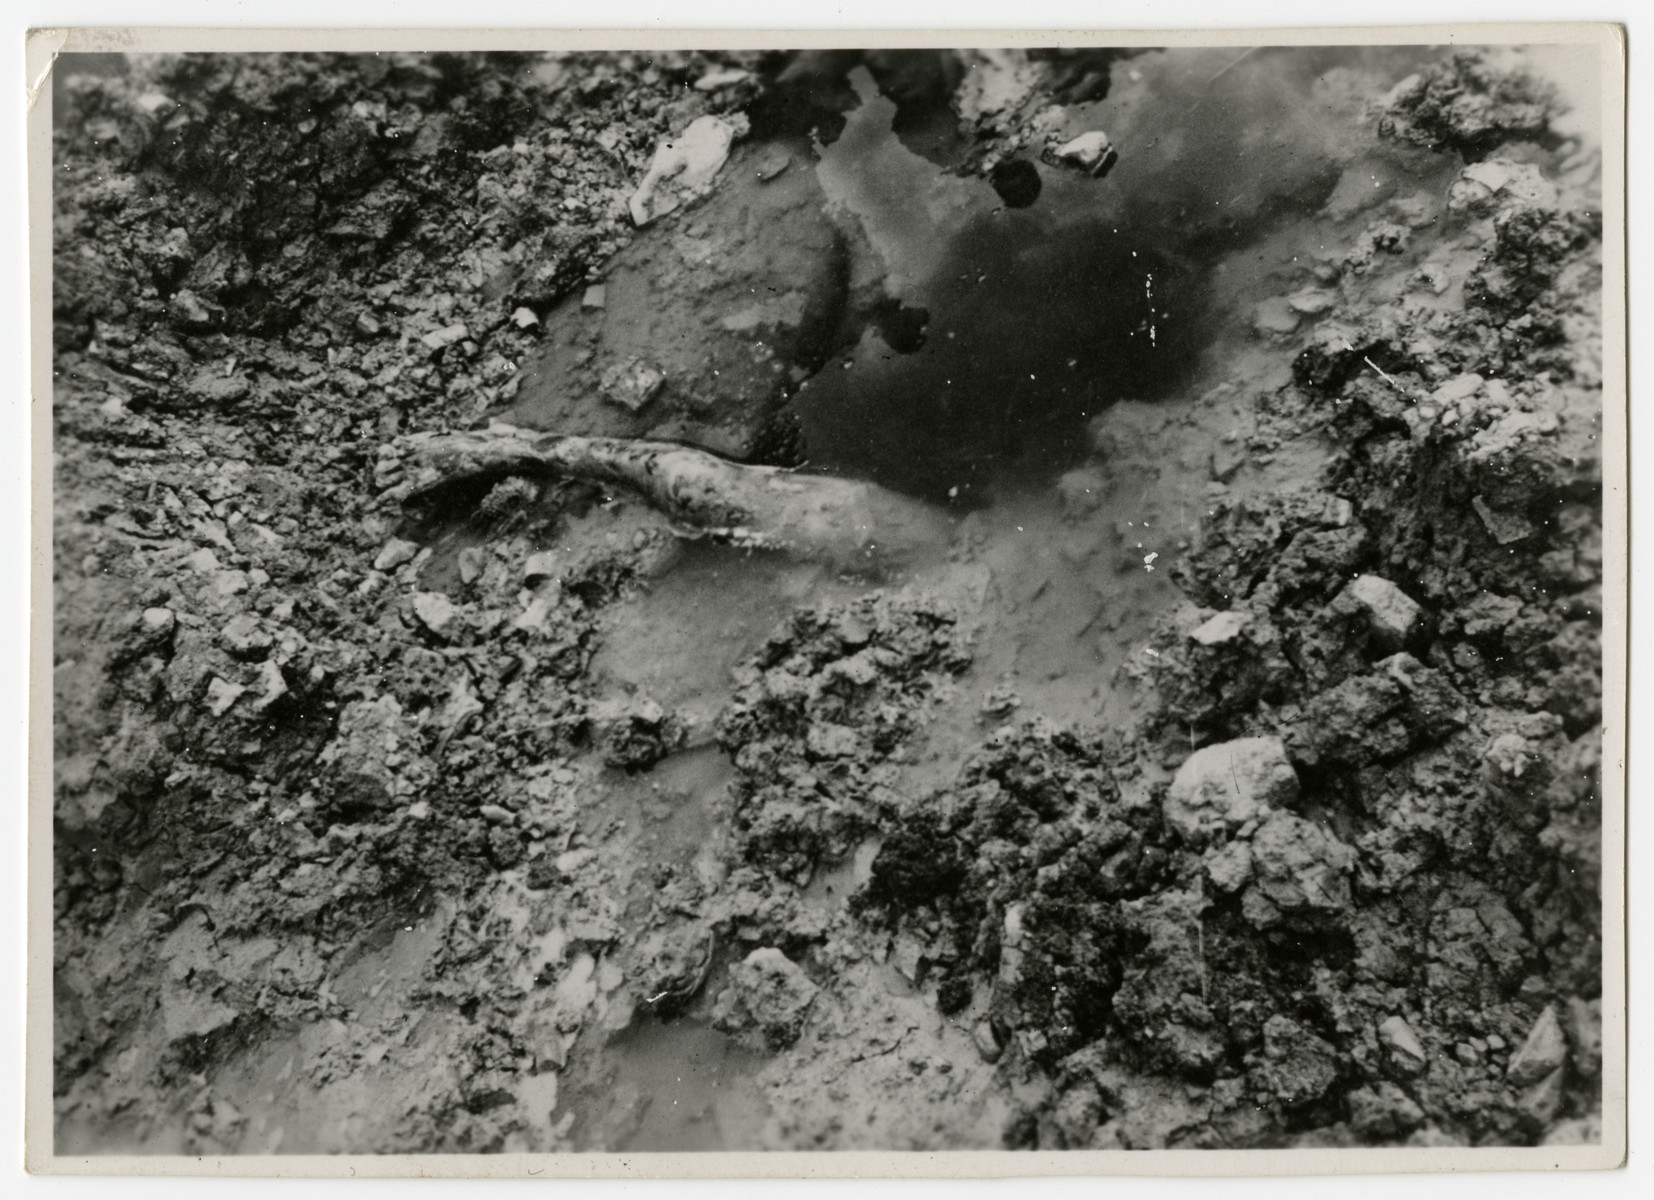 The leg of a body protrudes from a mass grave that was not full covered before the hasty retreat of the Nazis from Ohrdruf.

The original caption reads, "Leg of a body that is still protruding from the grave that was not fully covered by the hasty retreat of the Nazis. At Ohrdruf concentration camp Germany." [sic]

According to the Signal Corps caption, the photo was taken on  April 10, 1945.